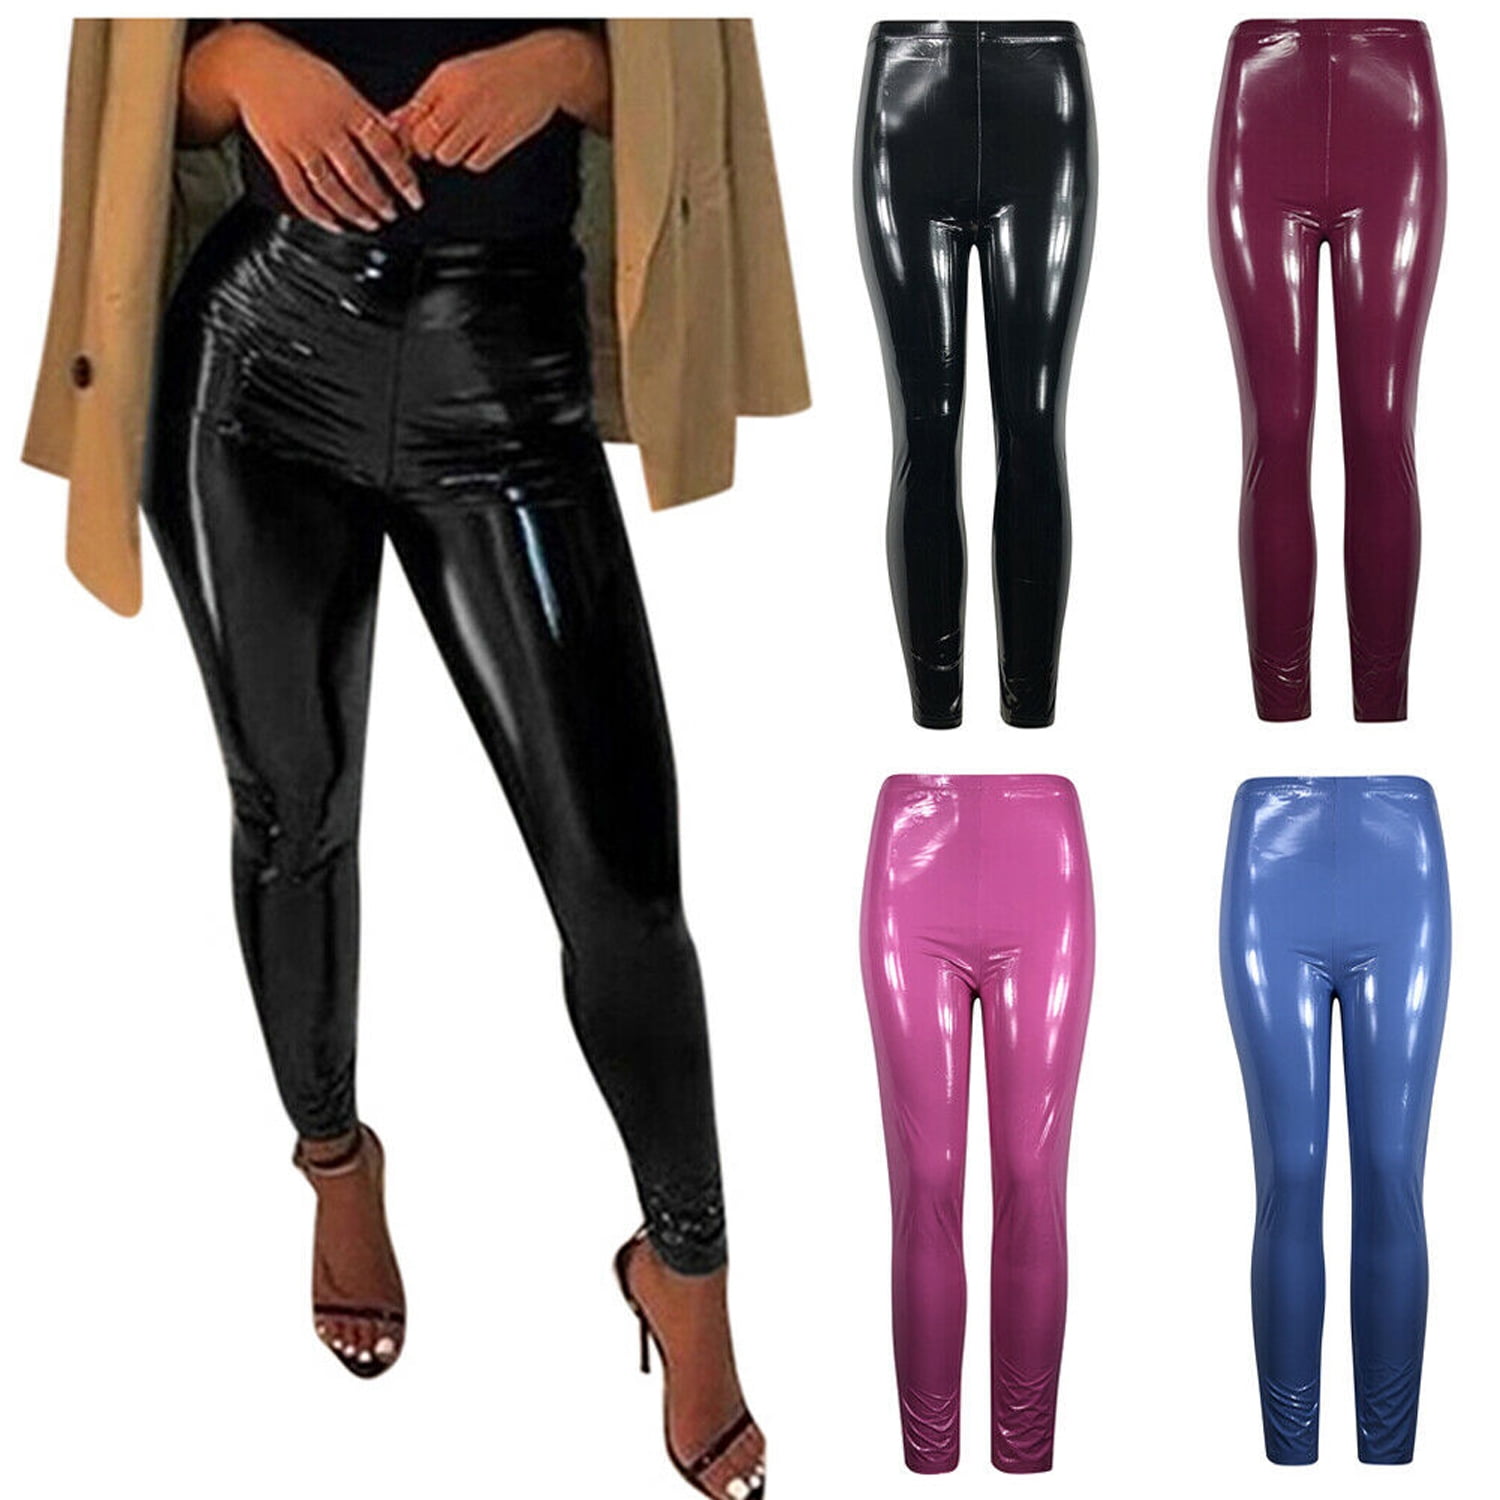 Women's High Waist Yoga Pants Push Up Faux Leather Leggings Stretch Trousers G52 